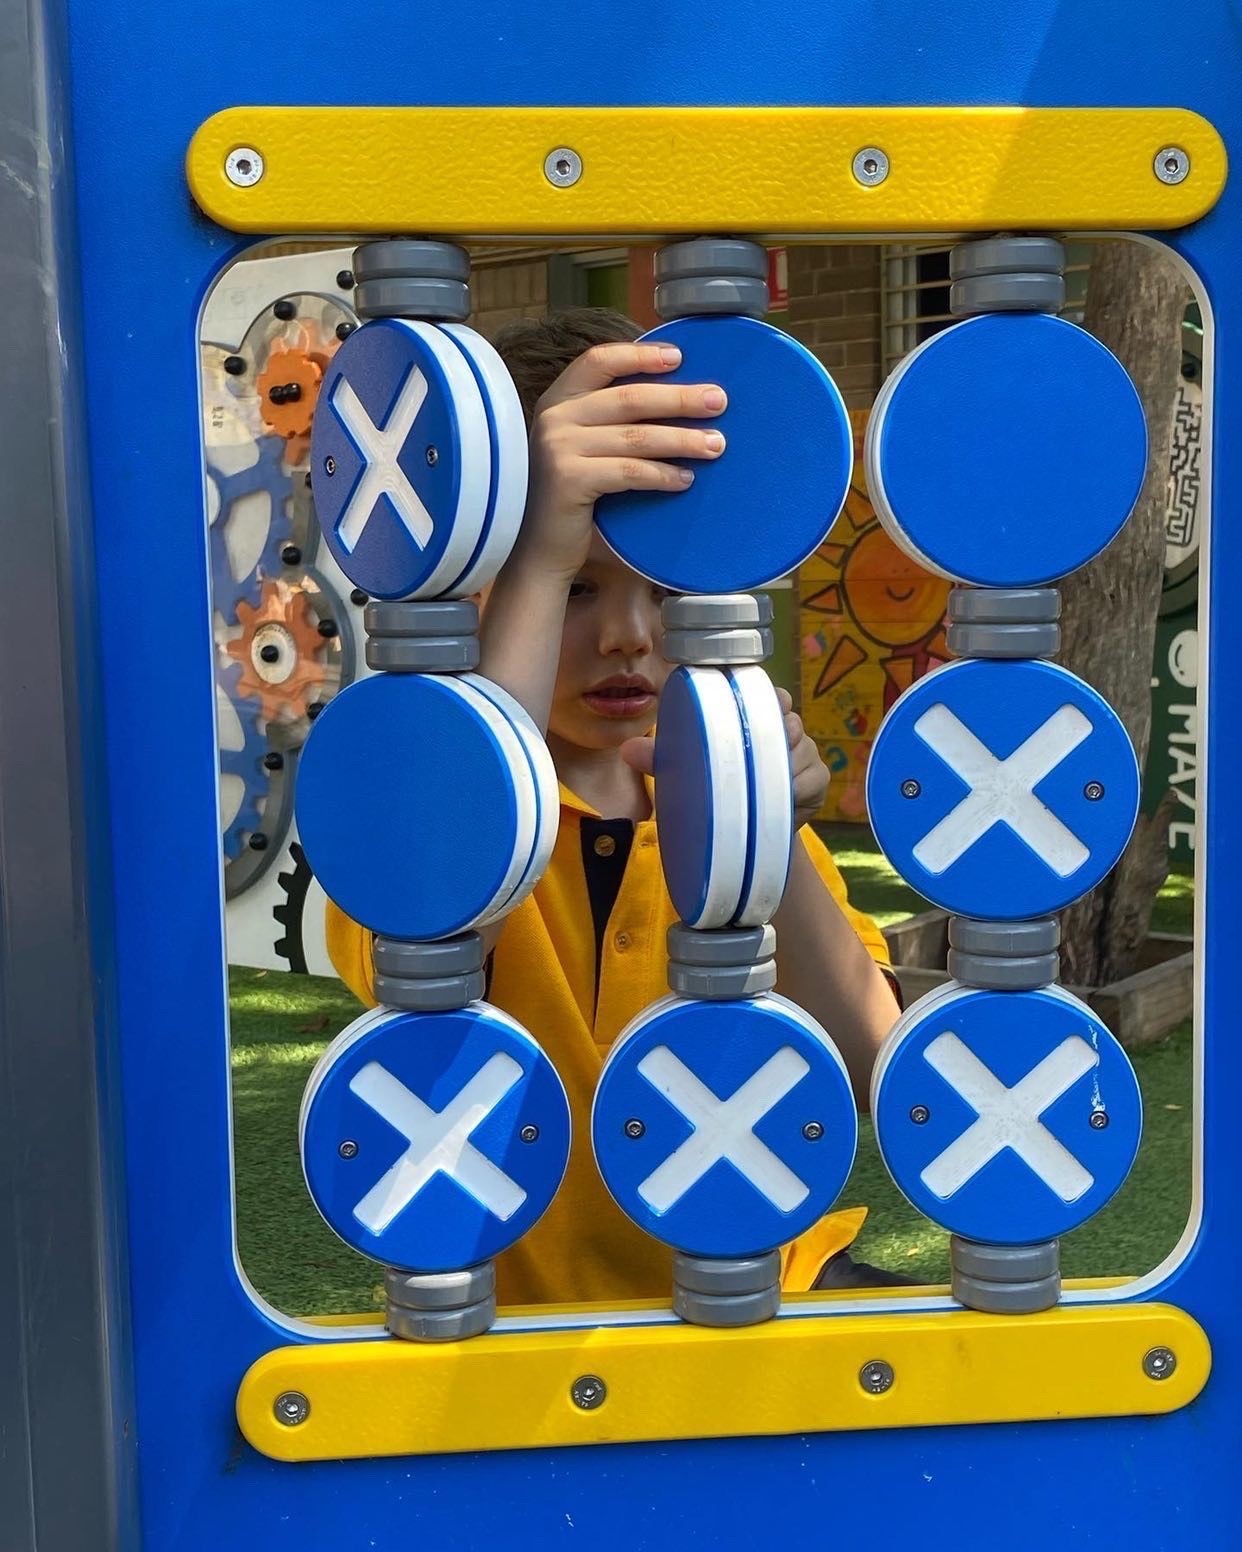 Young school boy playing with "X&O's - Noughts & Crosses" Sensory Panel in an outdoor playground